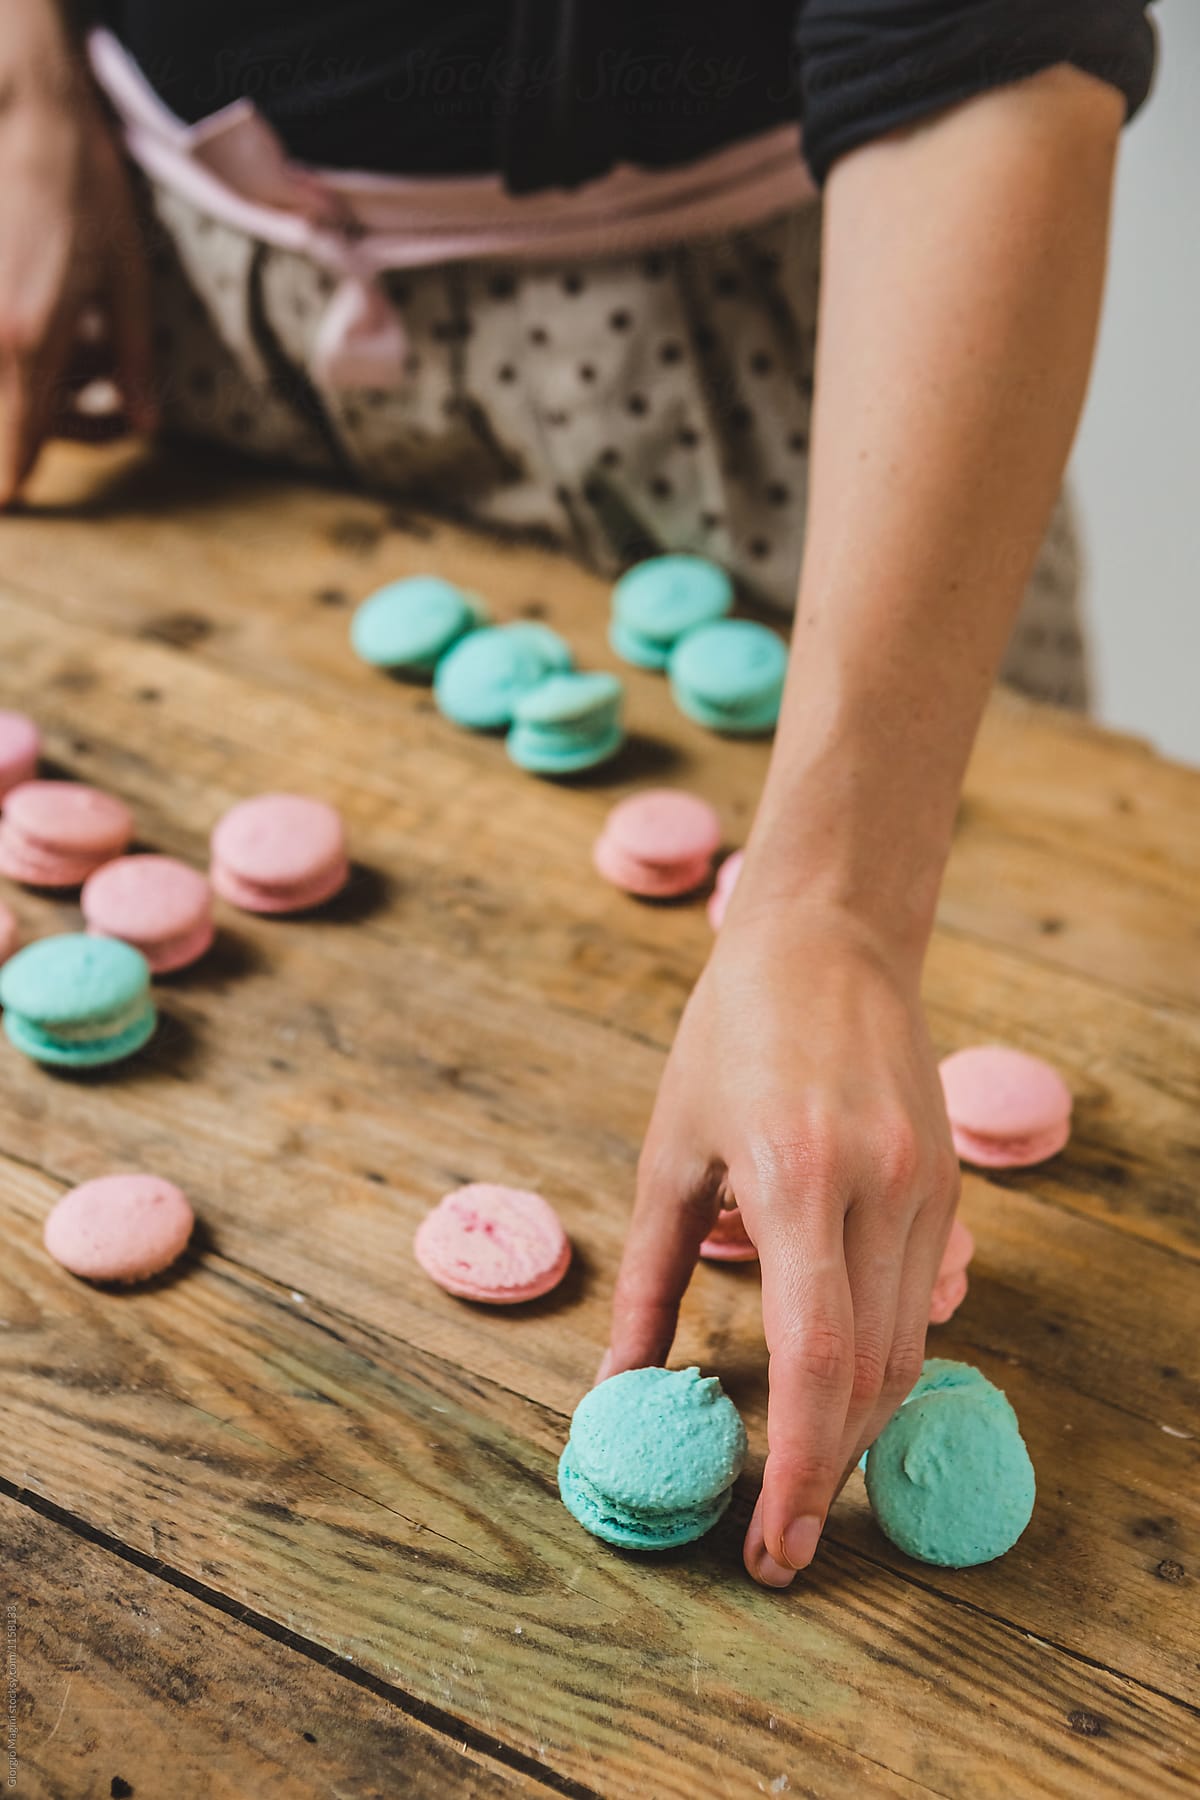 Woman Preparing Colored Macarons on a Wooden Table